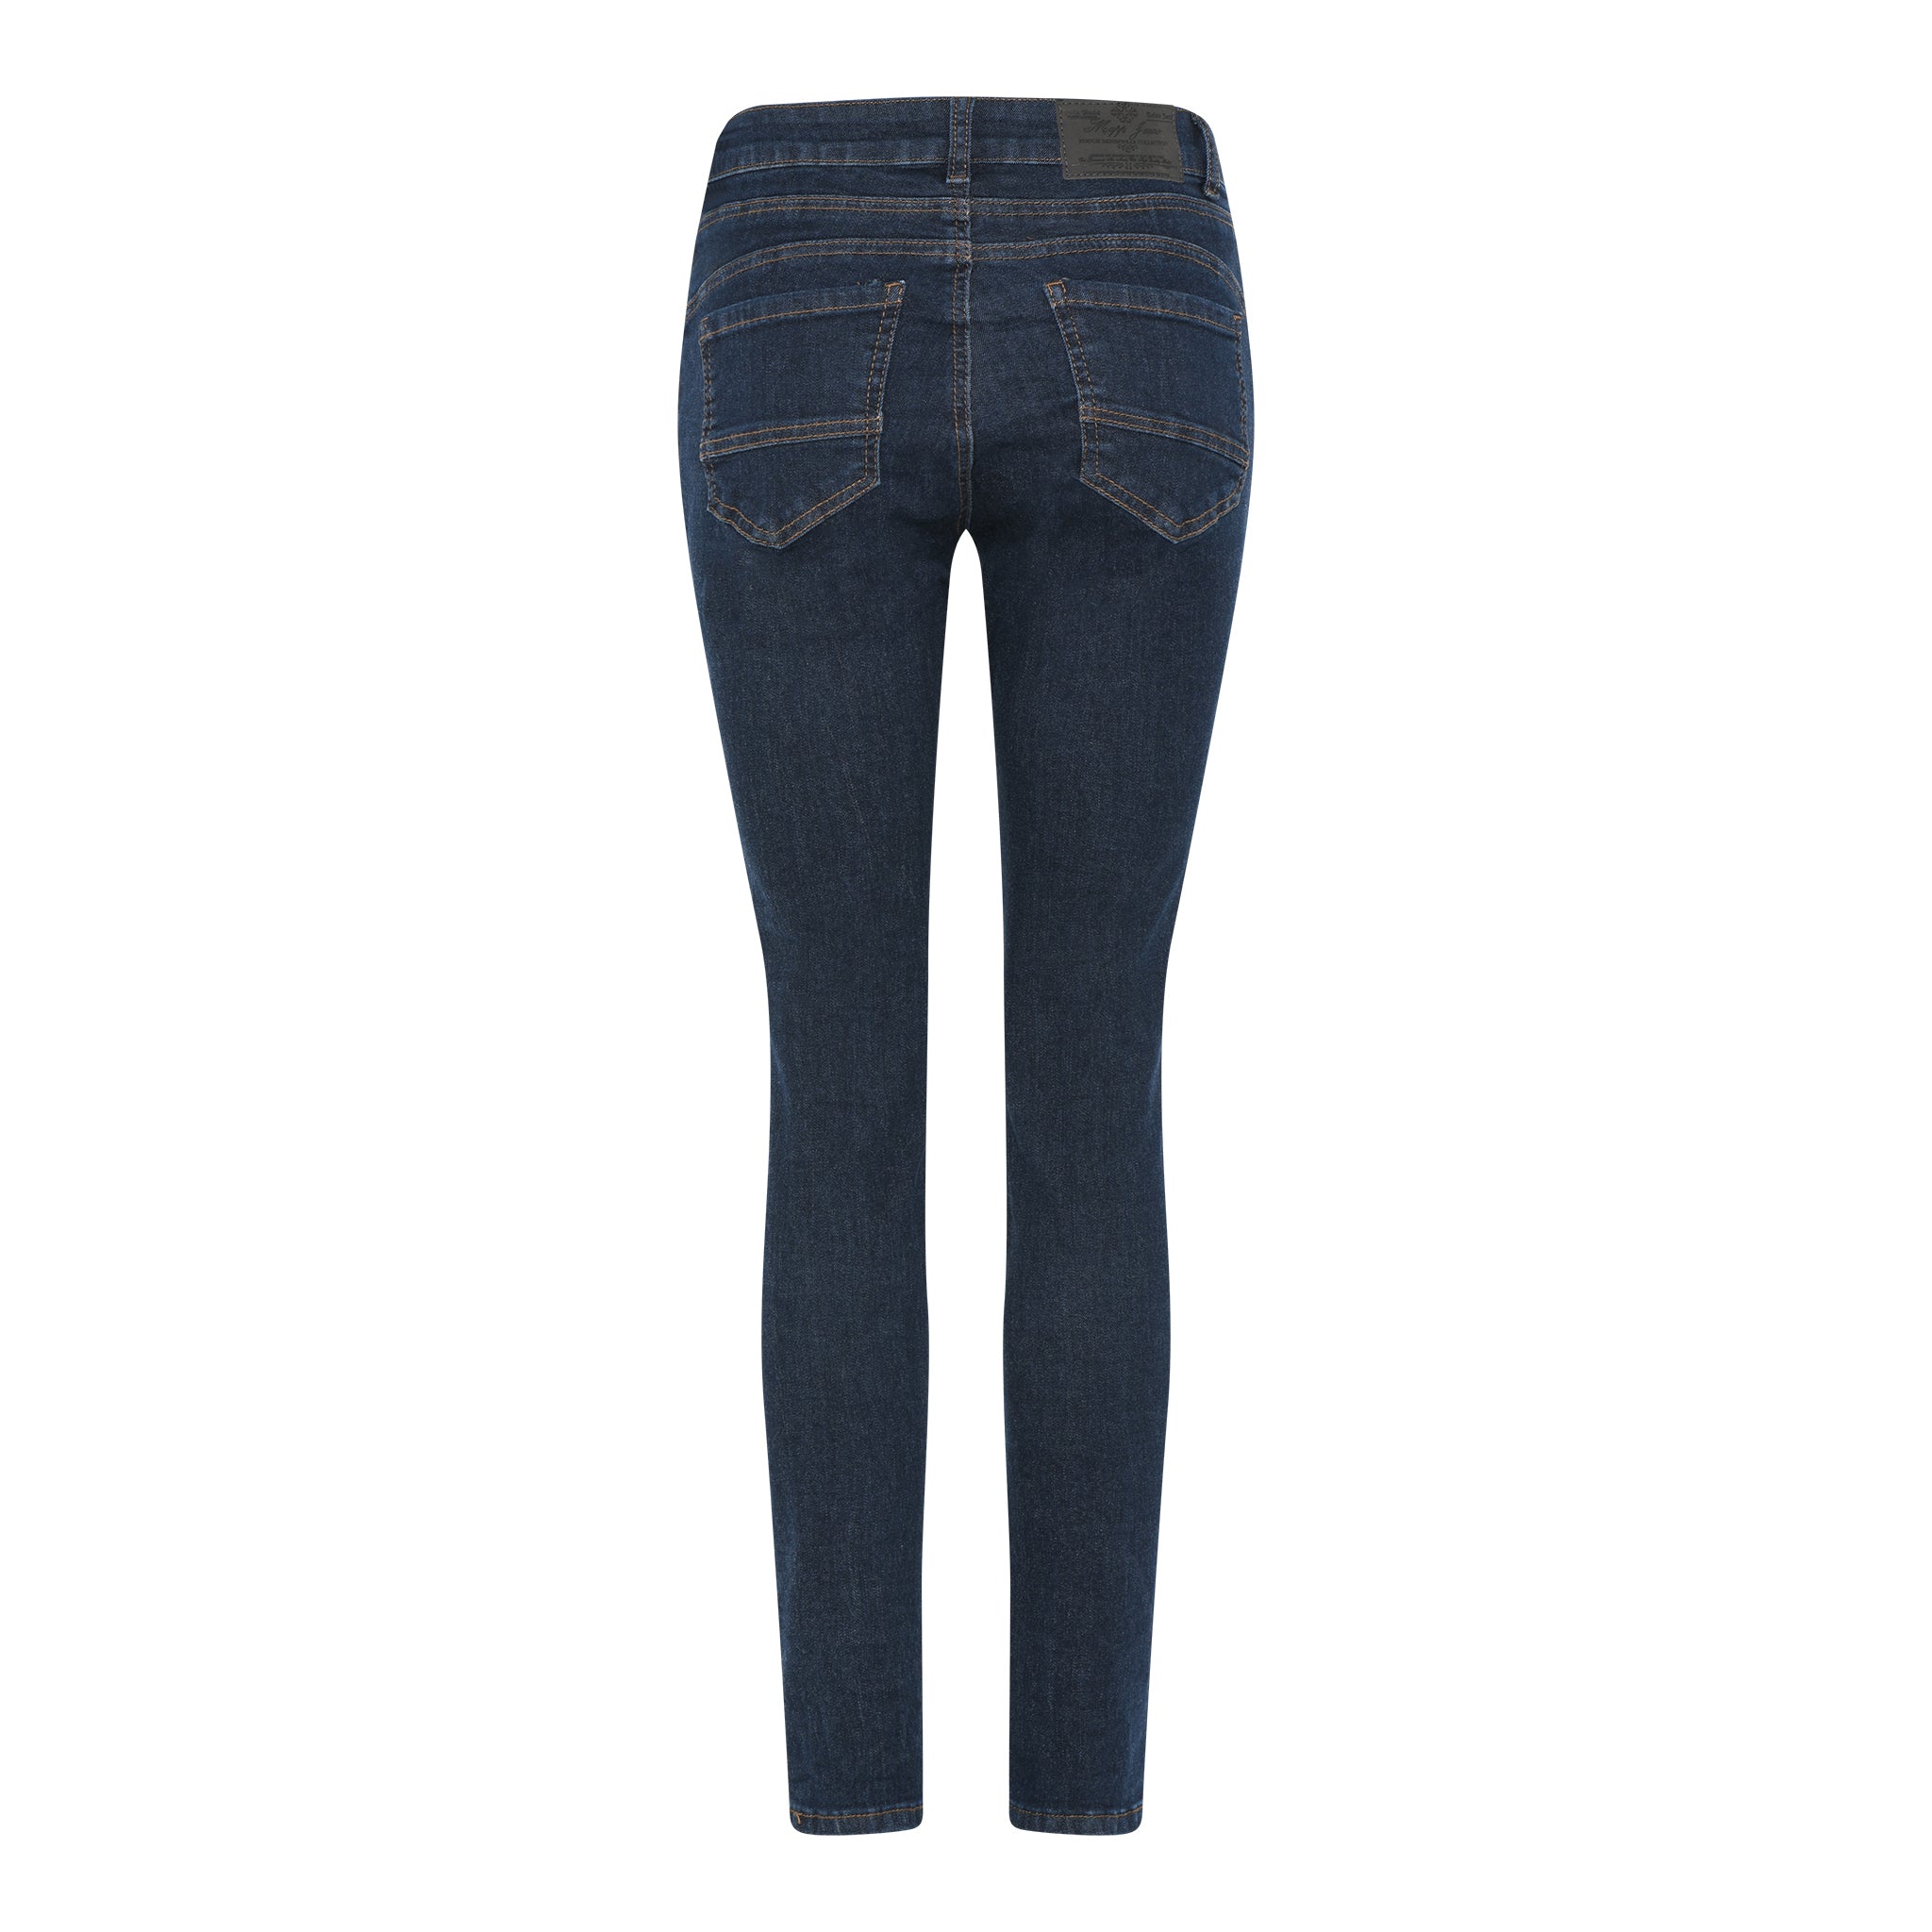 M.A.P.P PATTI JEANS MED POWER STRETCH